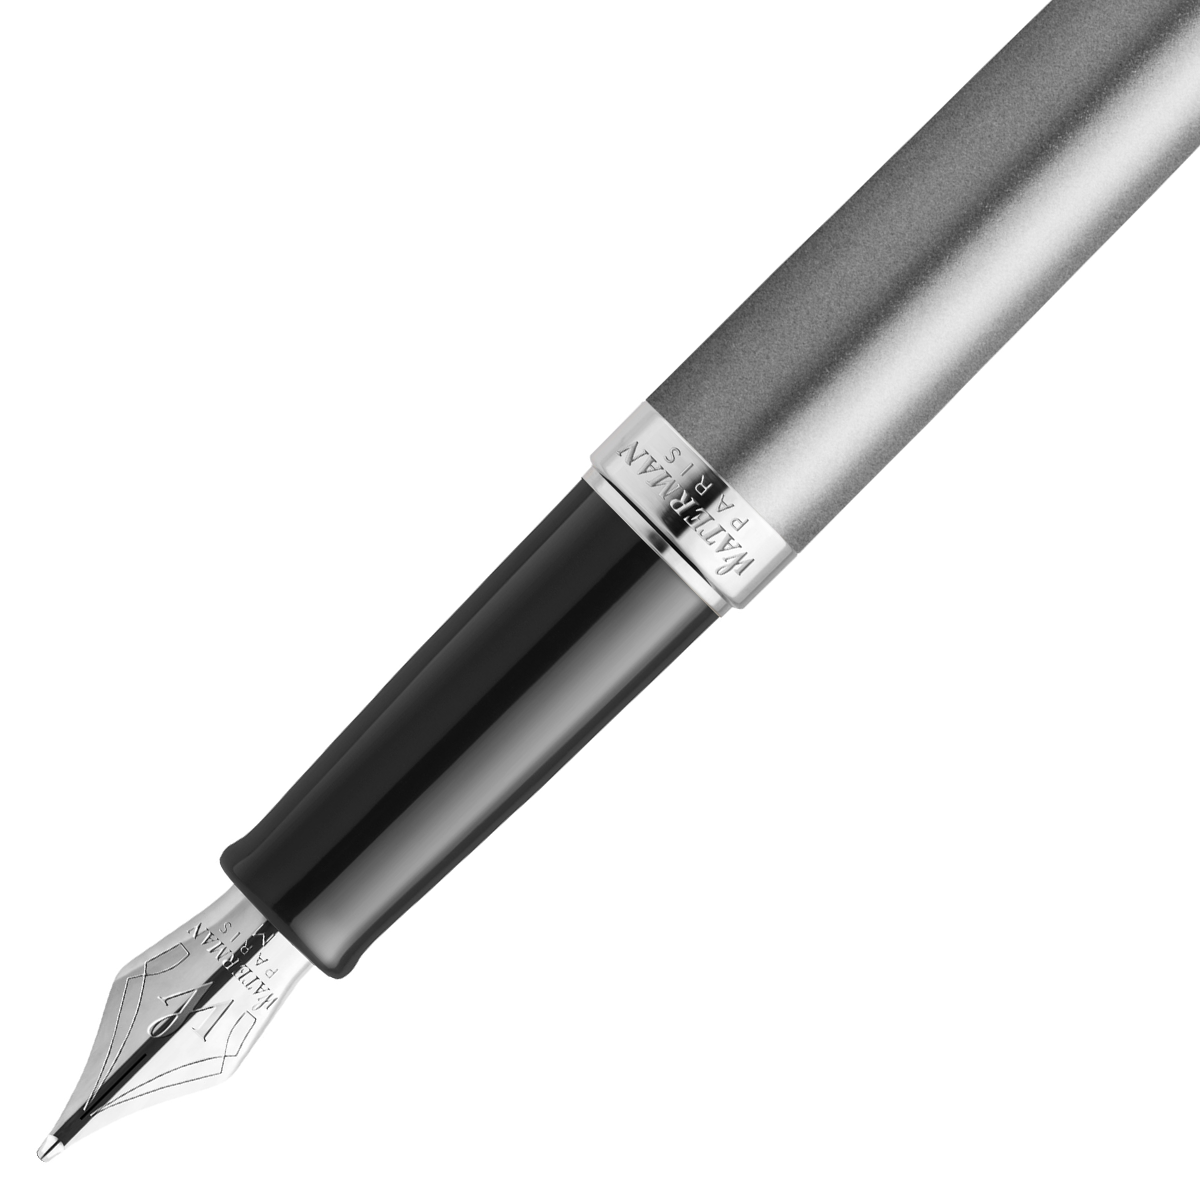 Hémisphère Essential Steel/Chrome Fountain Pen Fine in the group Pens / Fine Writing / Fountain Pens at Pen Store (128025)